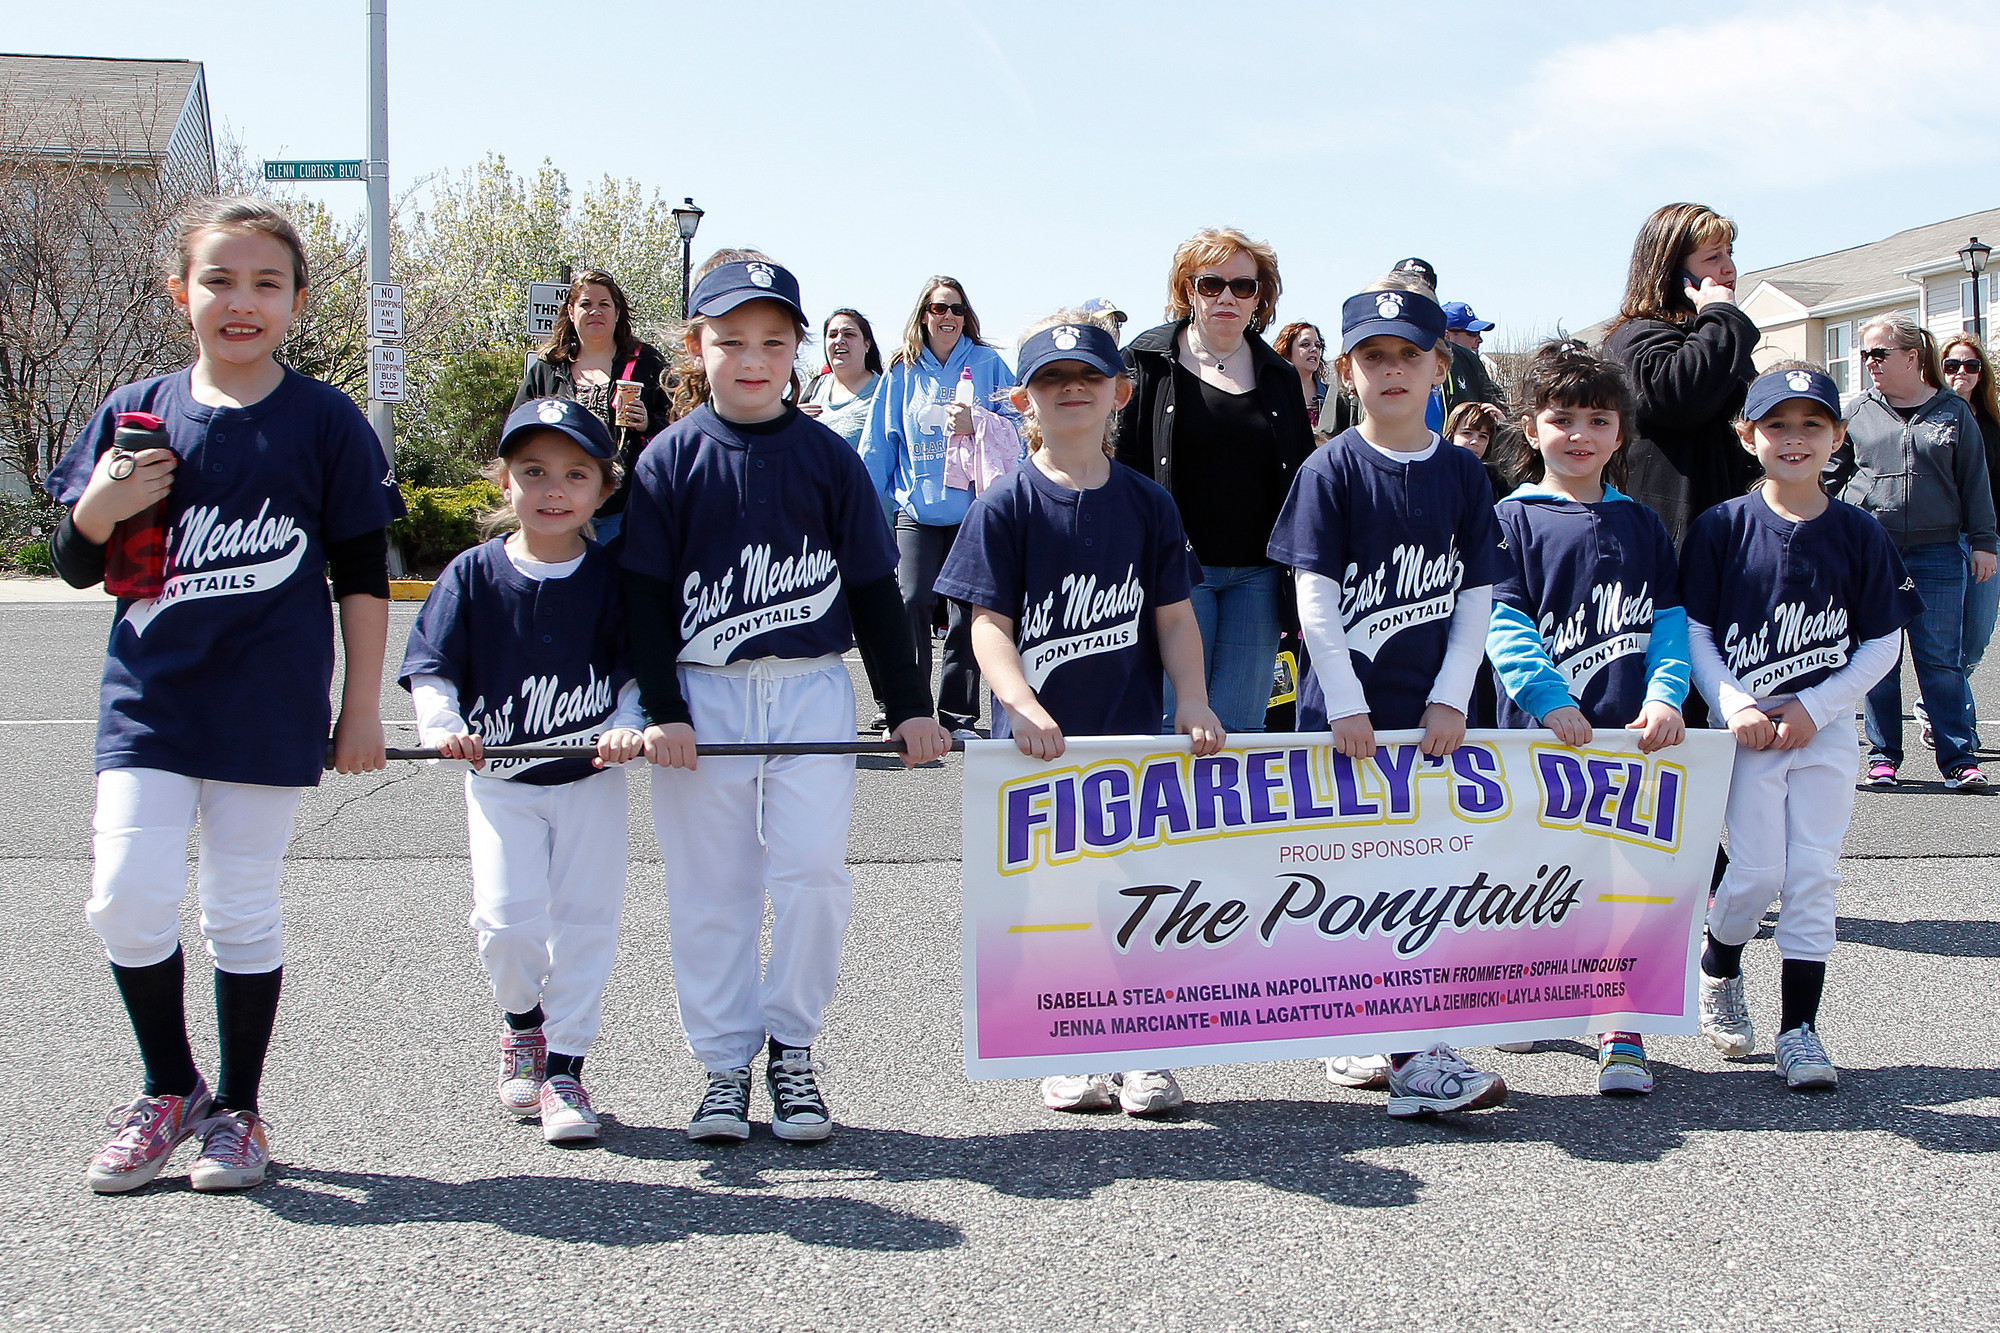 The East Meadow Ponytails team, sponsored by Figarelly’s Deli, was one of many teams who gathered together and marched during the East Meadow Baseball Softball Association’s annual parade.